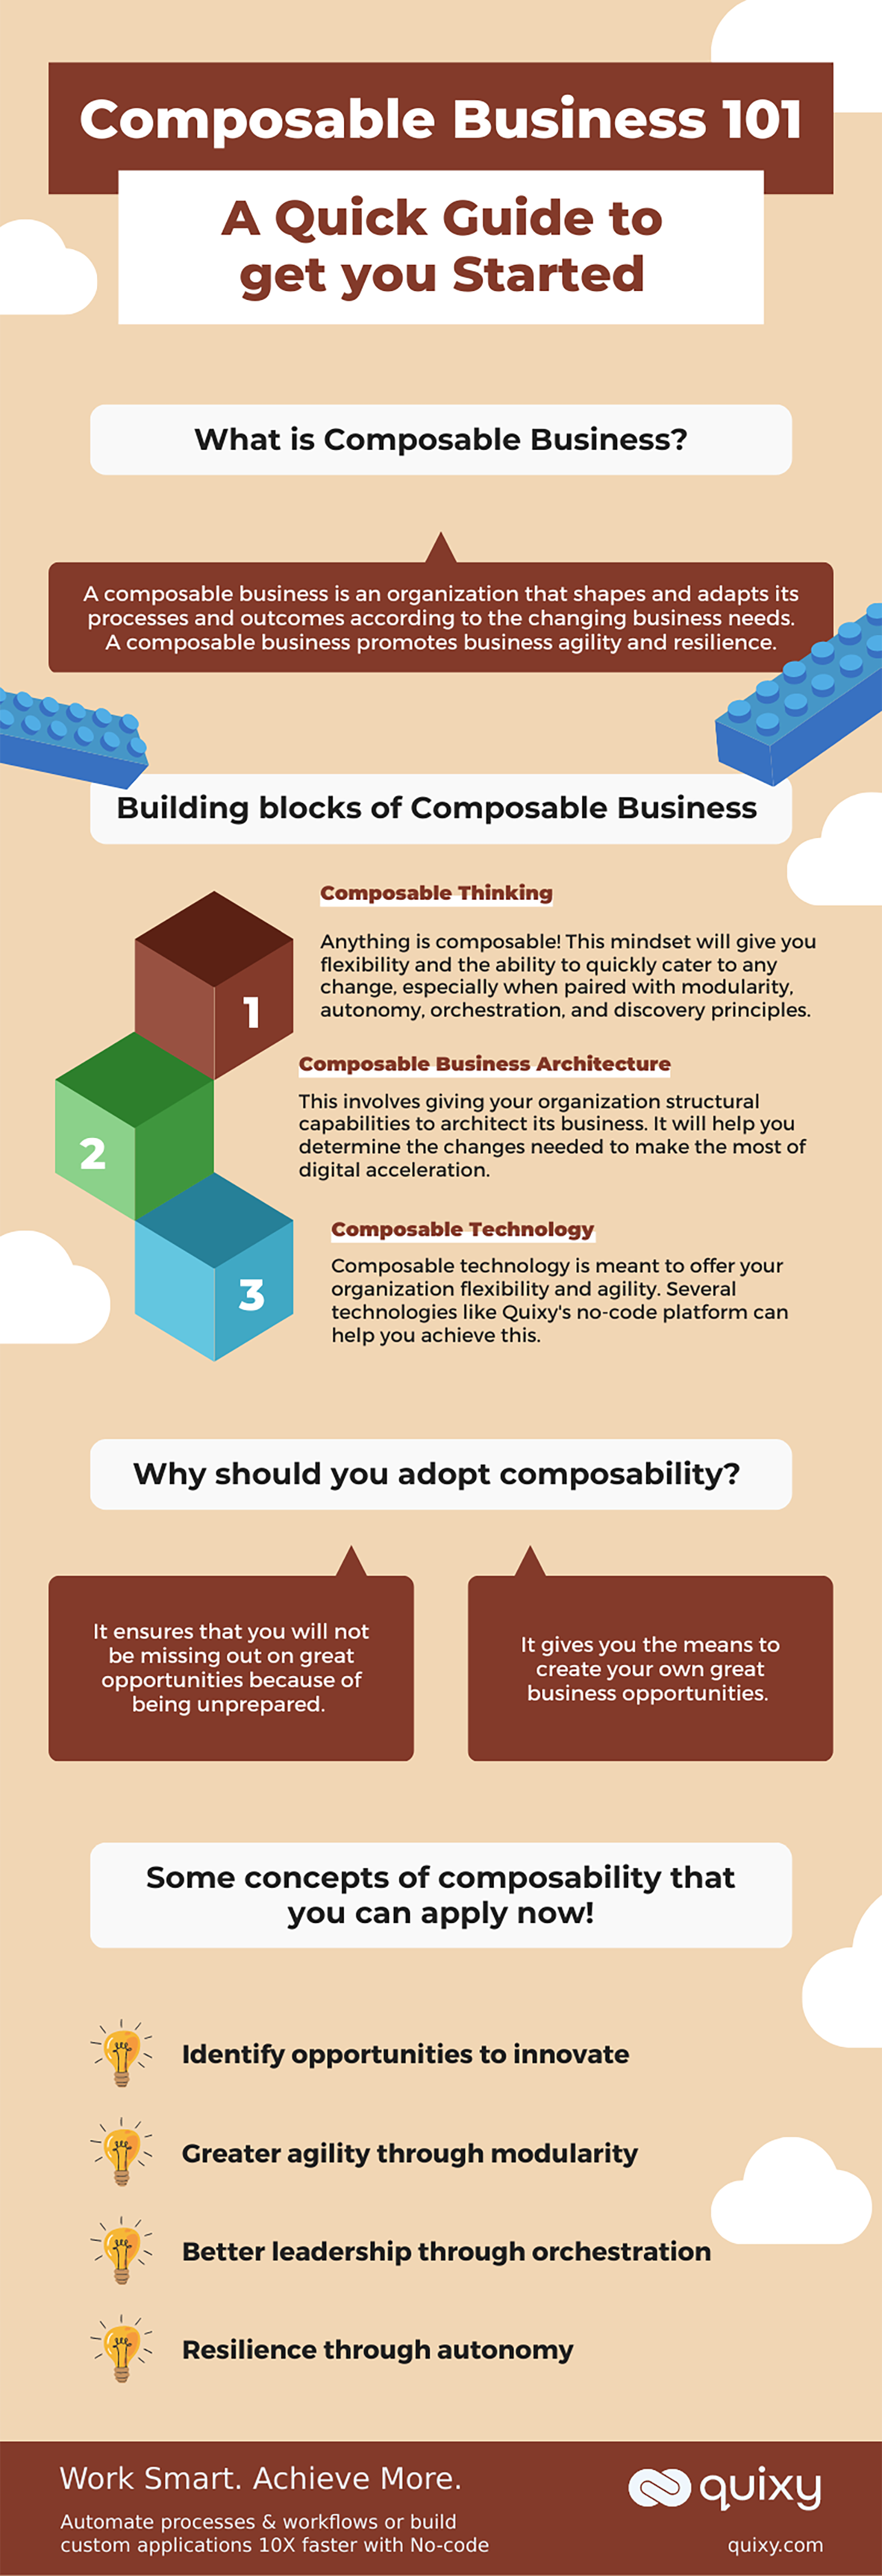 Composable Business 101 A quick guide to get you started Infographic